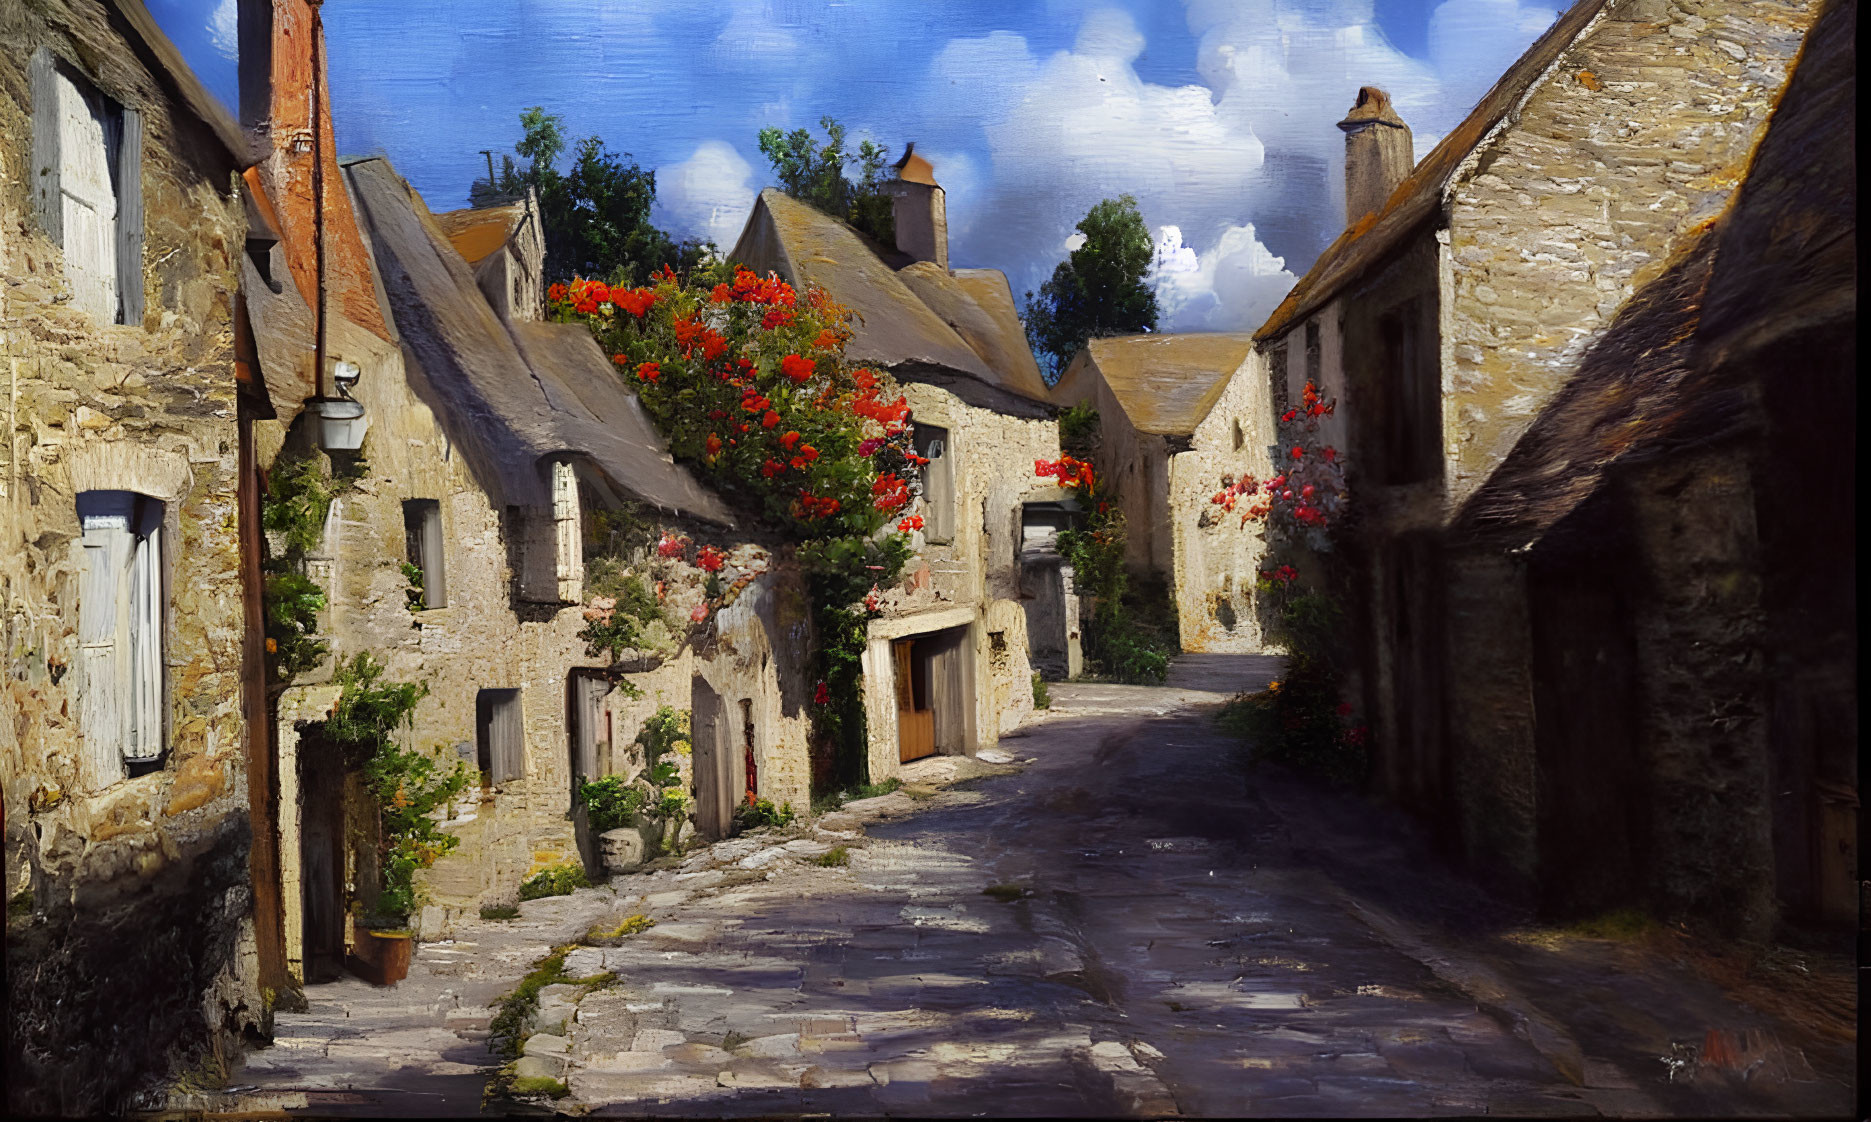 Quaint cobblestone alley with red flowers and stone houses under blue sky